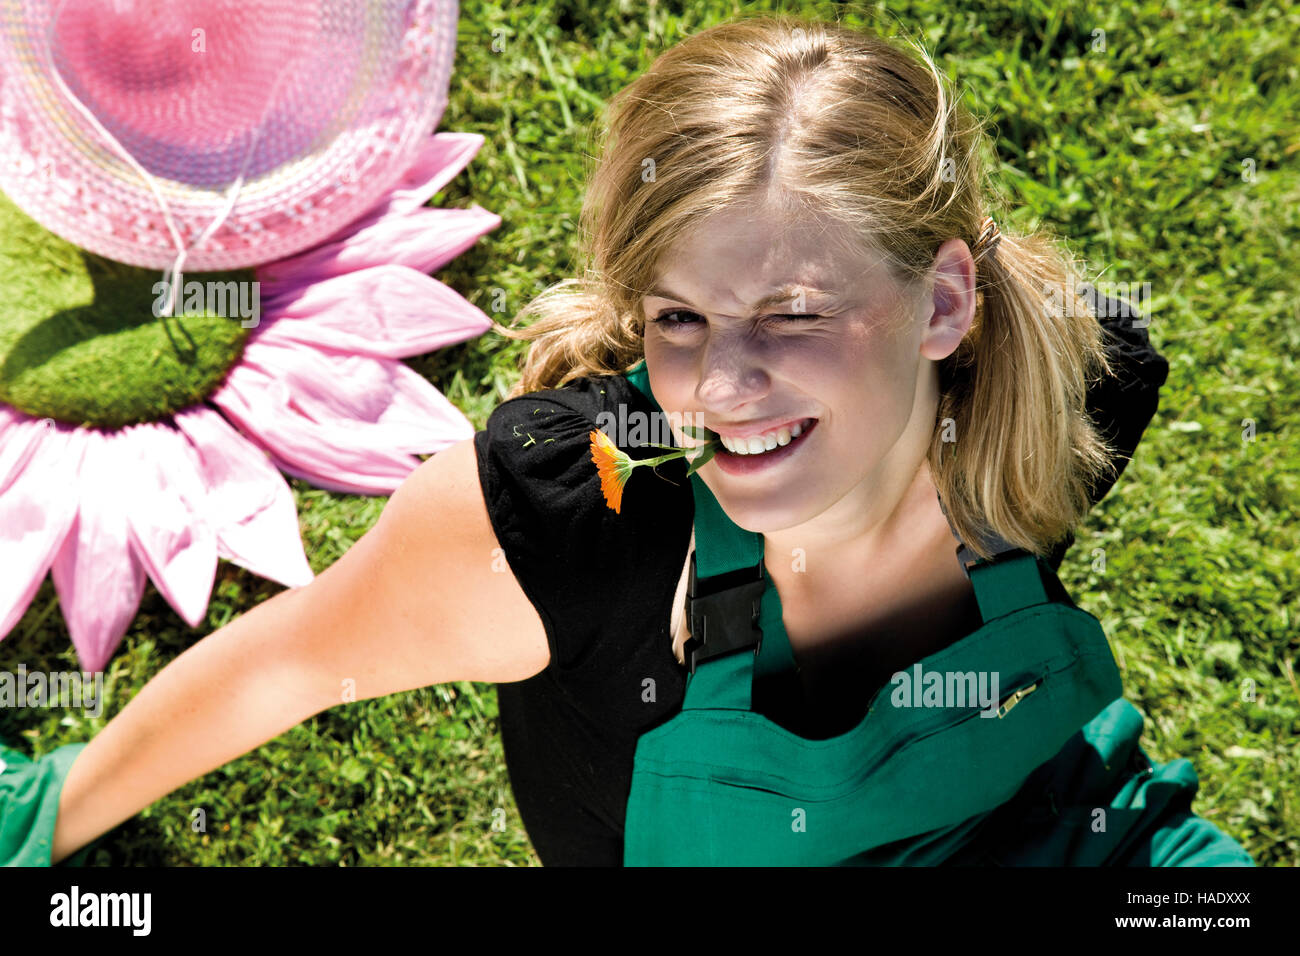 Female gardener with flower in her mouth Stock Photo